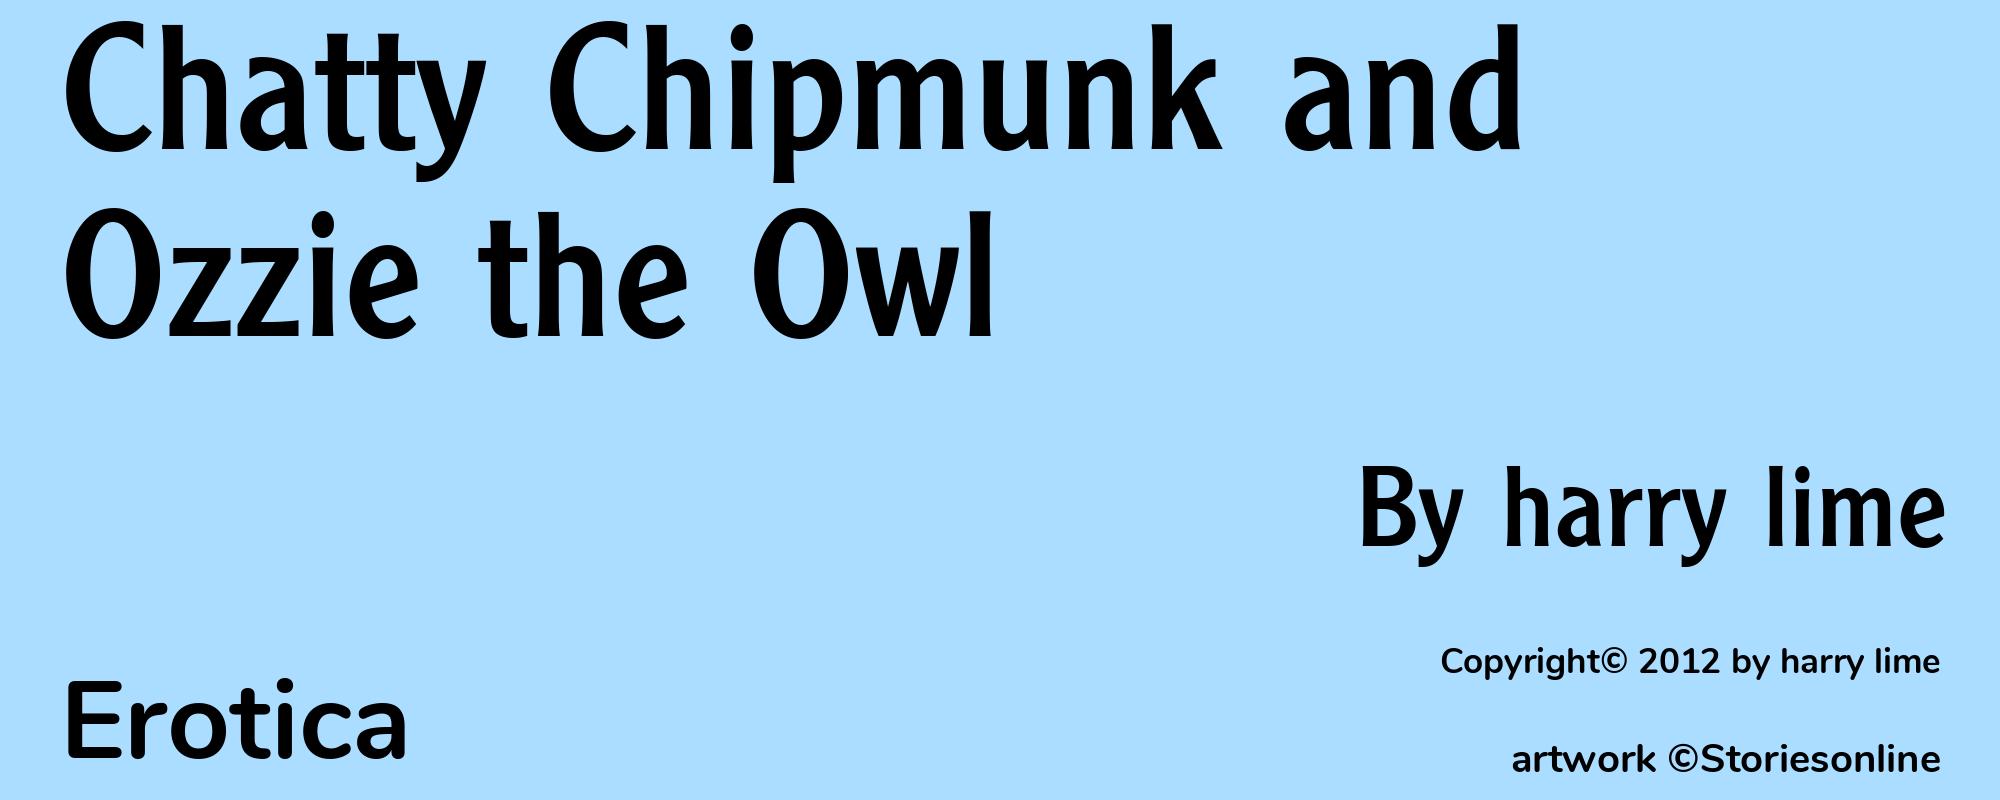 Chatty Chipmunk and Ozzie the Owl - Cover